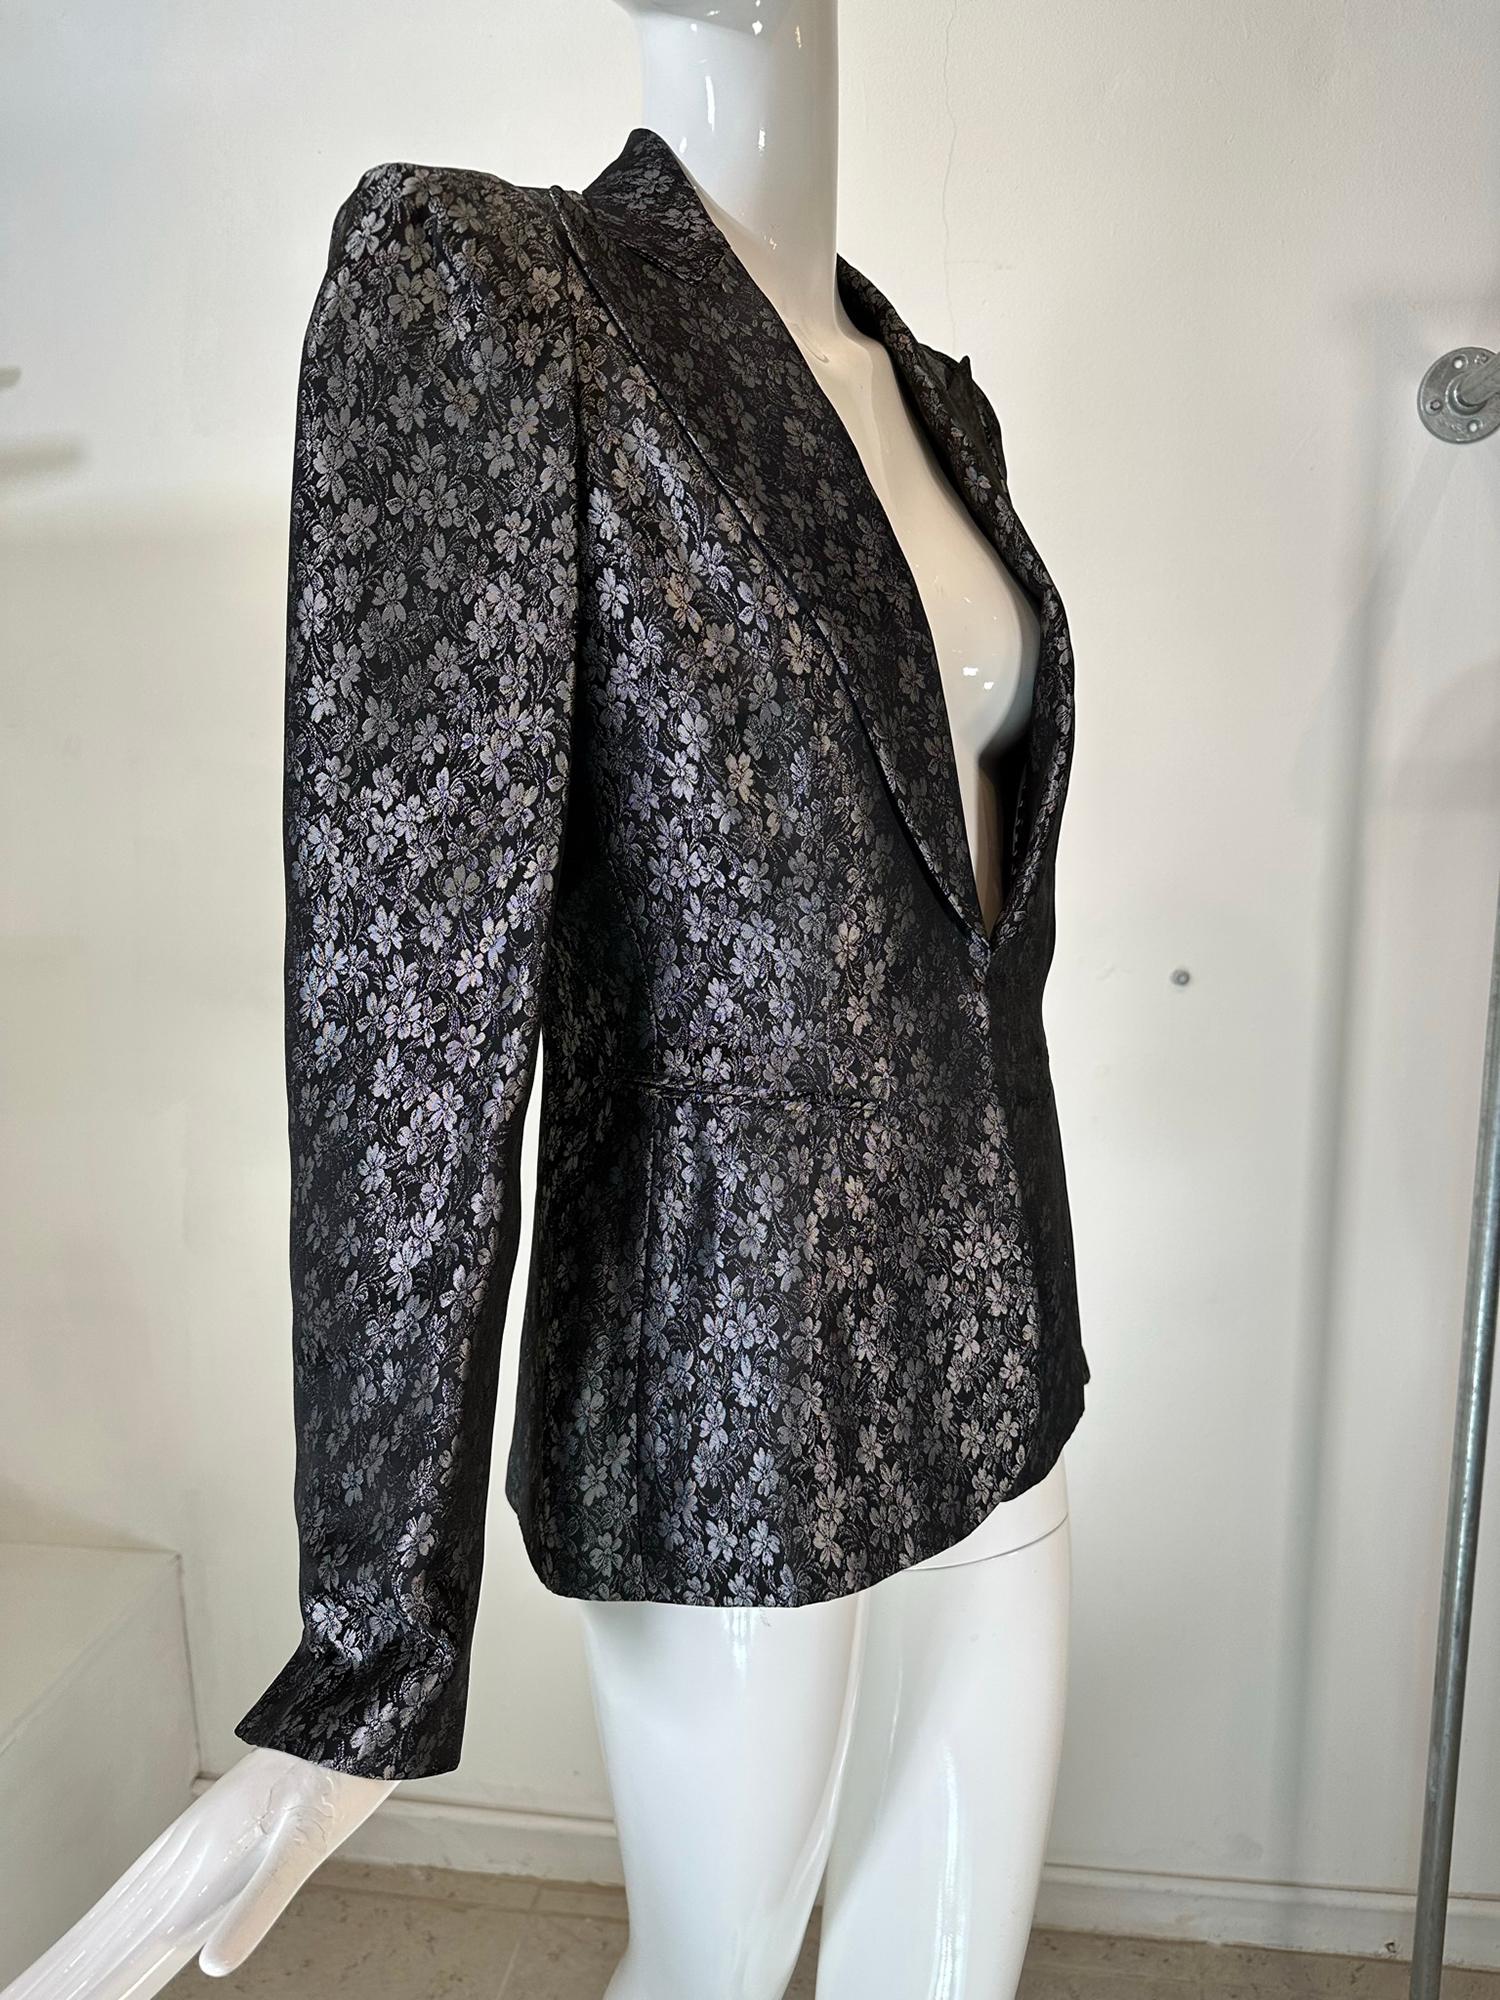  Richard Tyler black & silver brocade tailored single breasted jacket,from the 1990s. A sleek jacket for day or evening as good with jeans as a simple cocktail dress. Amazing shoulders, shaped to perfection. The jacket tapers at the waist and skims